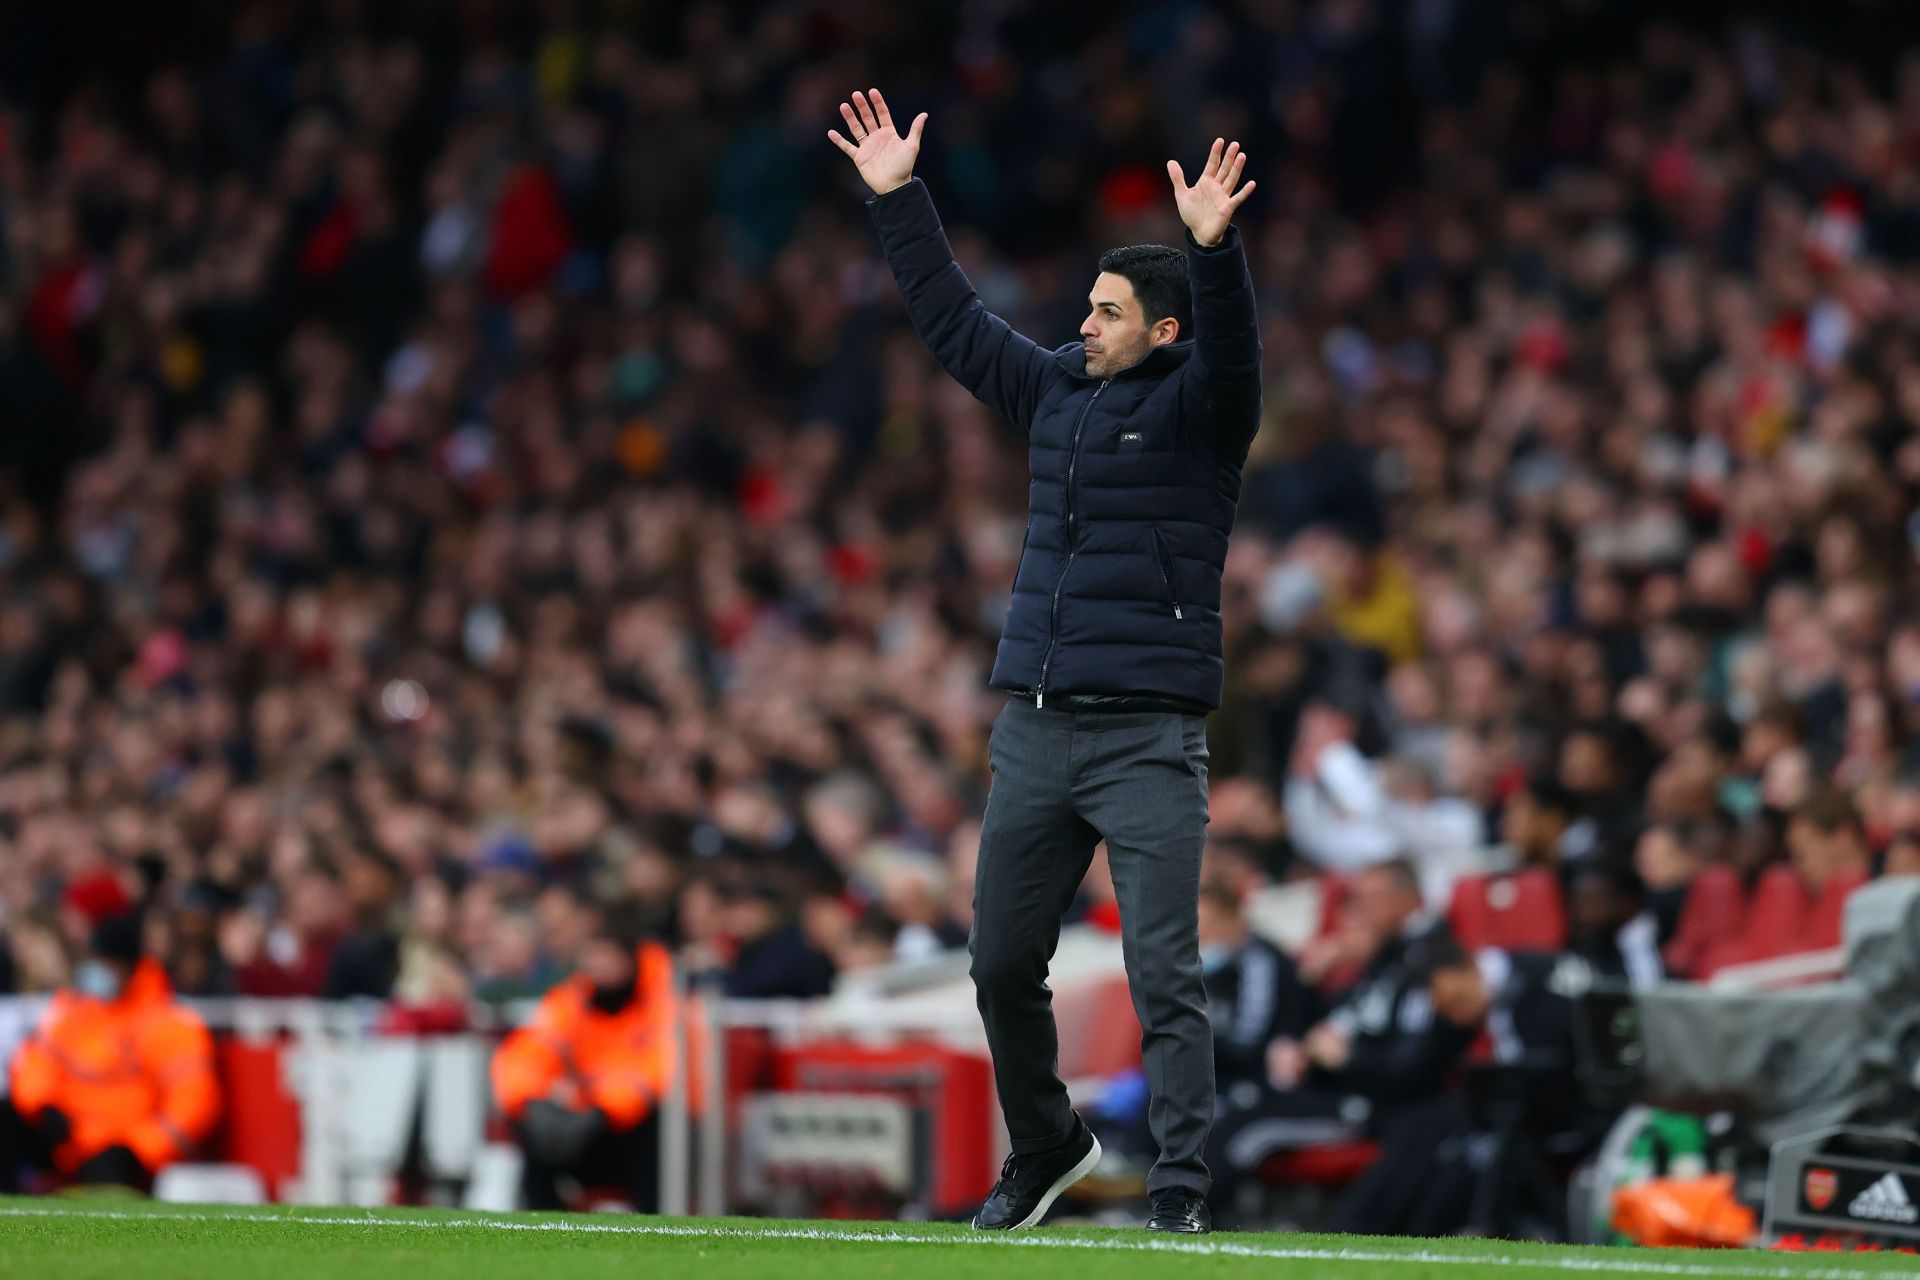 Arsenal manager Mikel Arteta is eager to secure UEFA Champions League football.